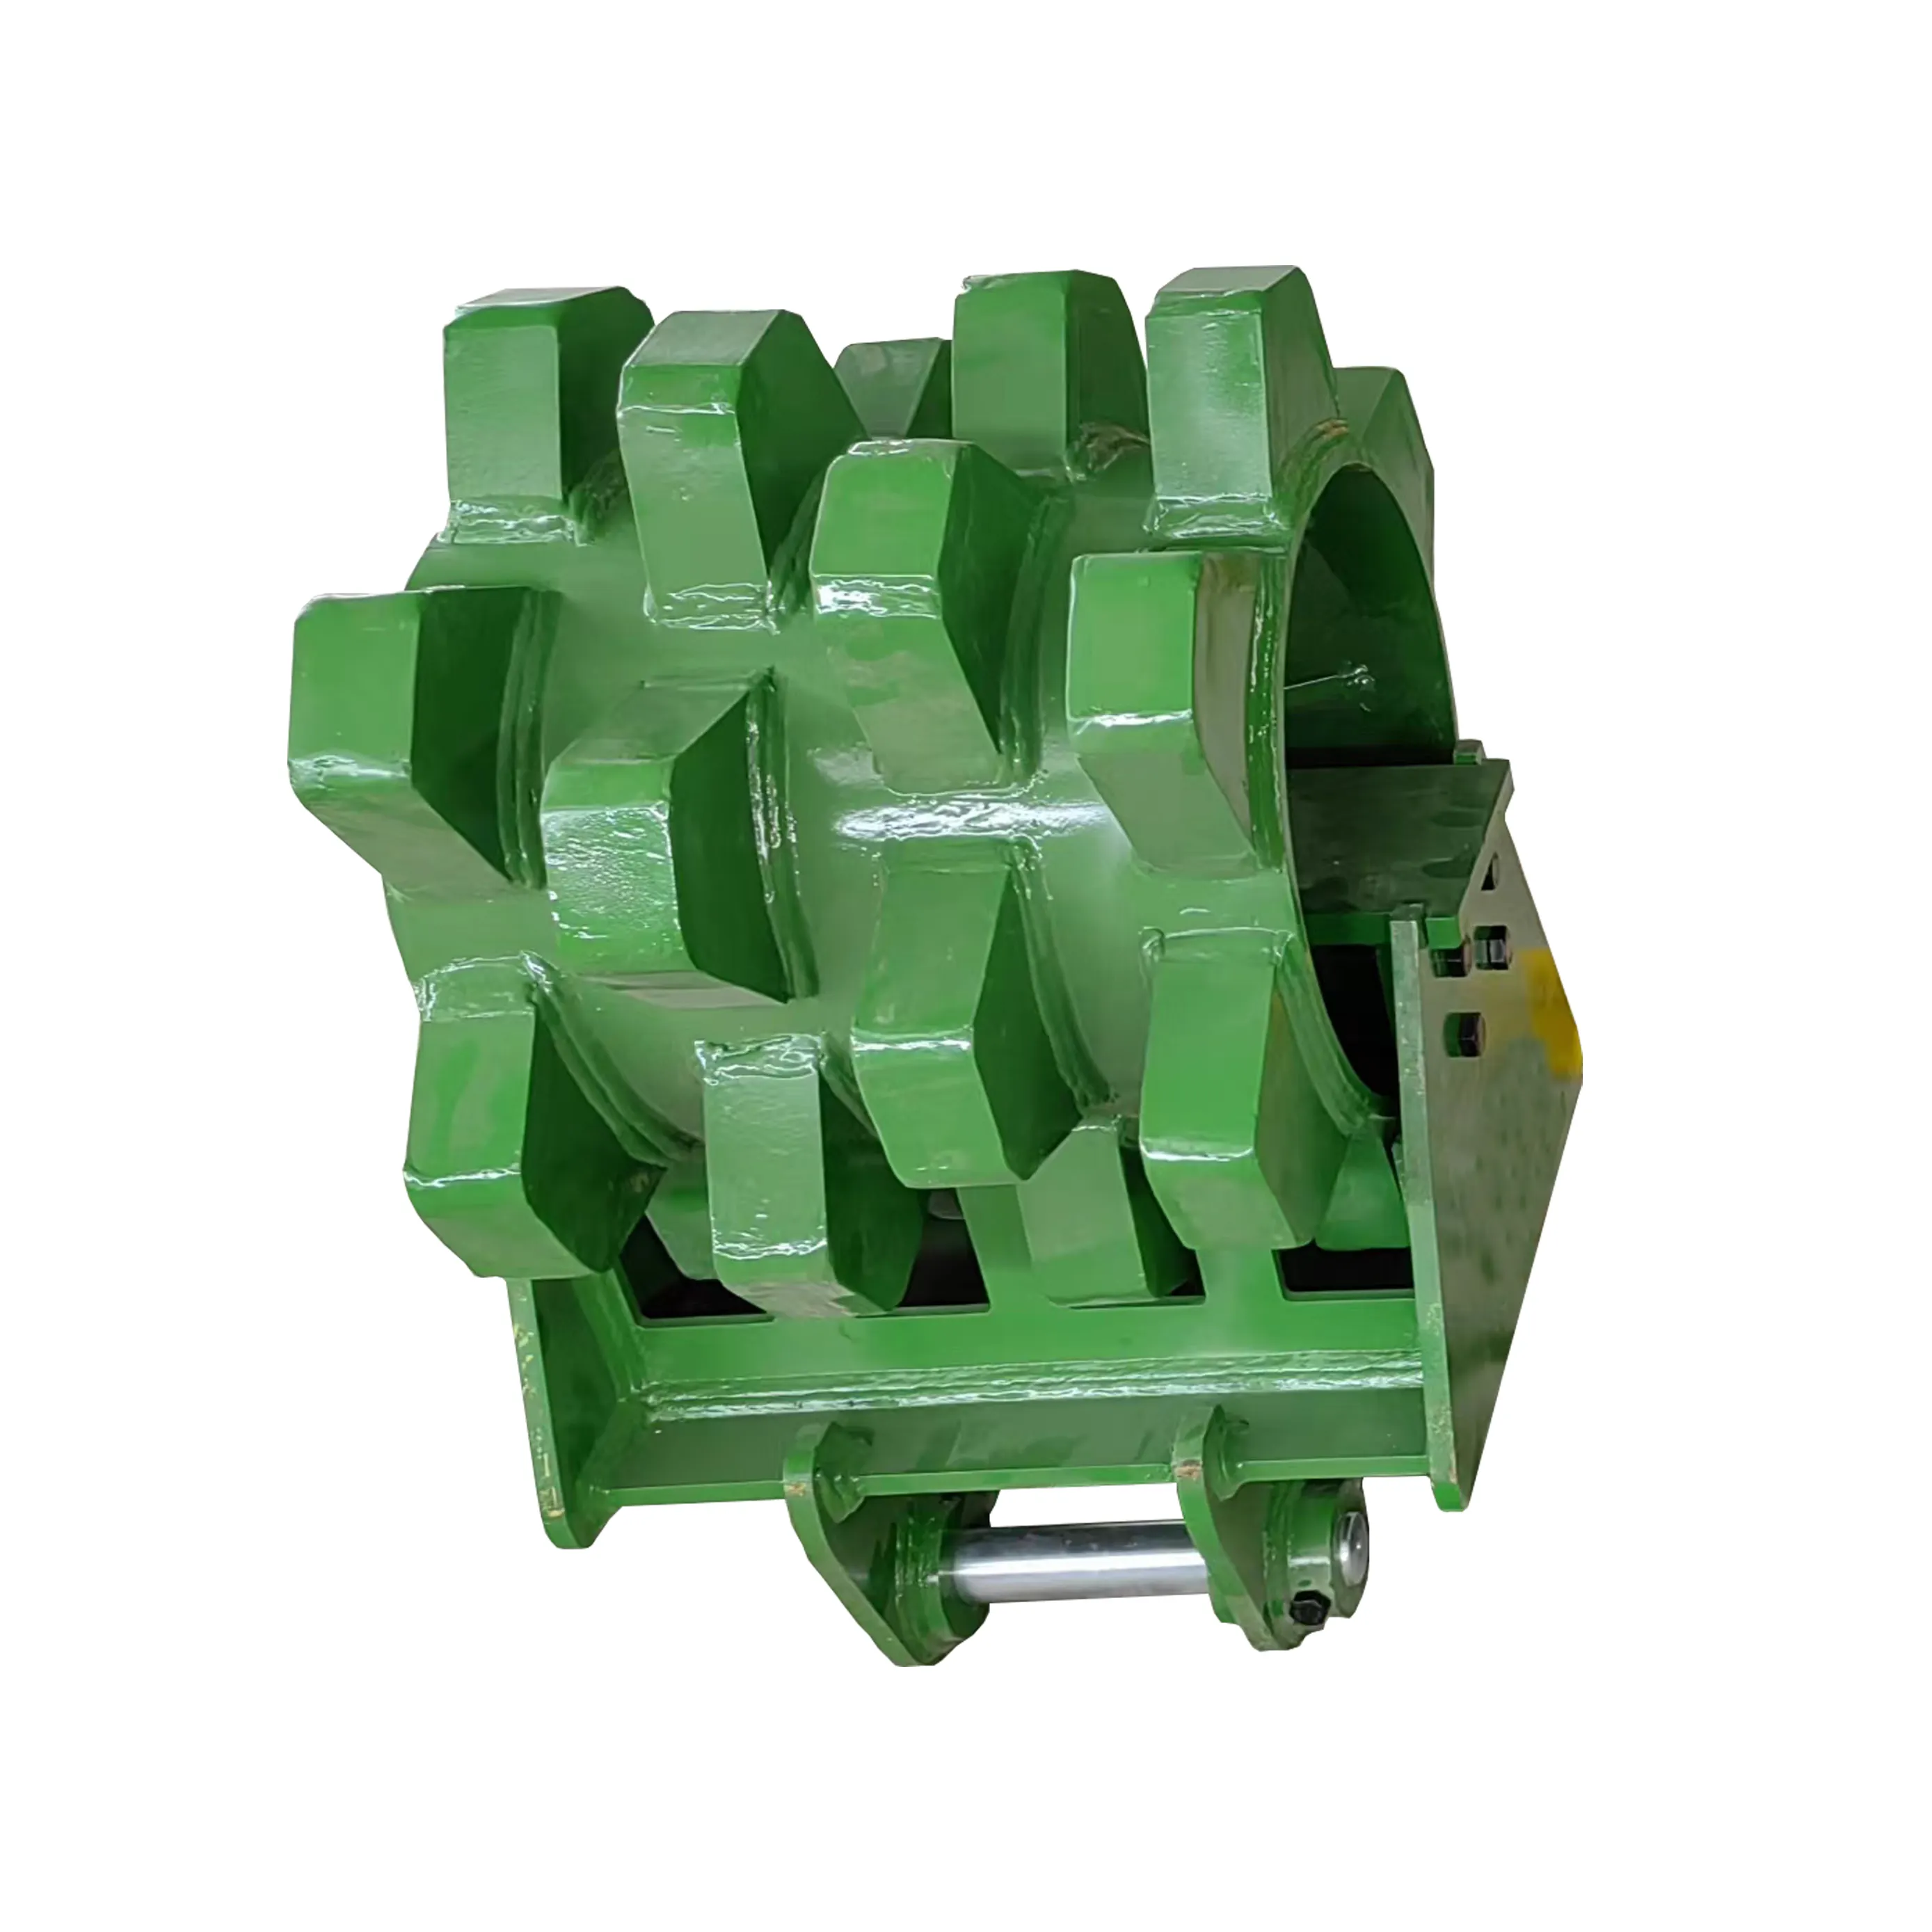 3t 5t excavator attachment road compactor roller compactor wheel made in China